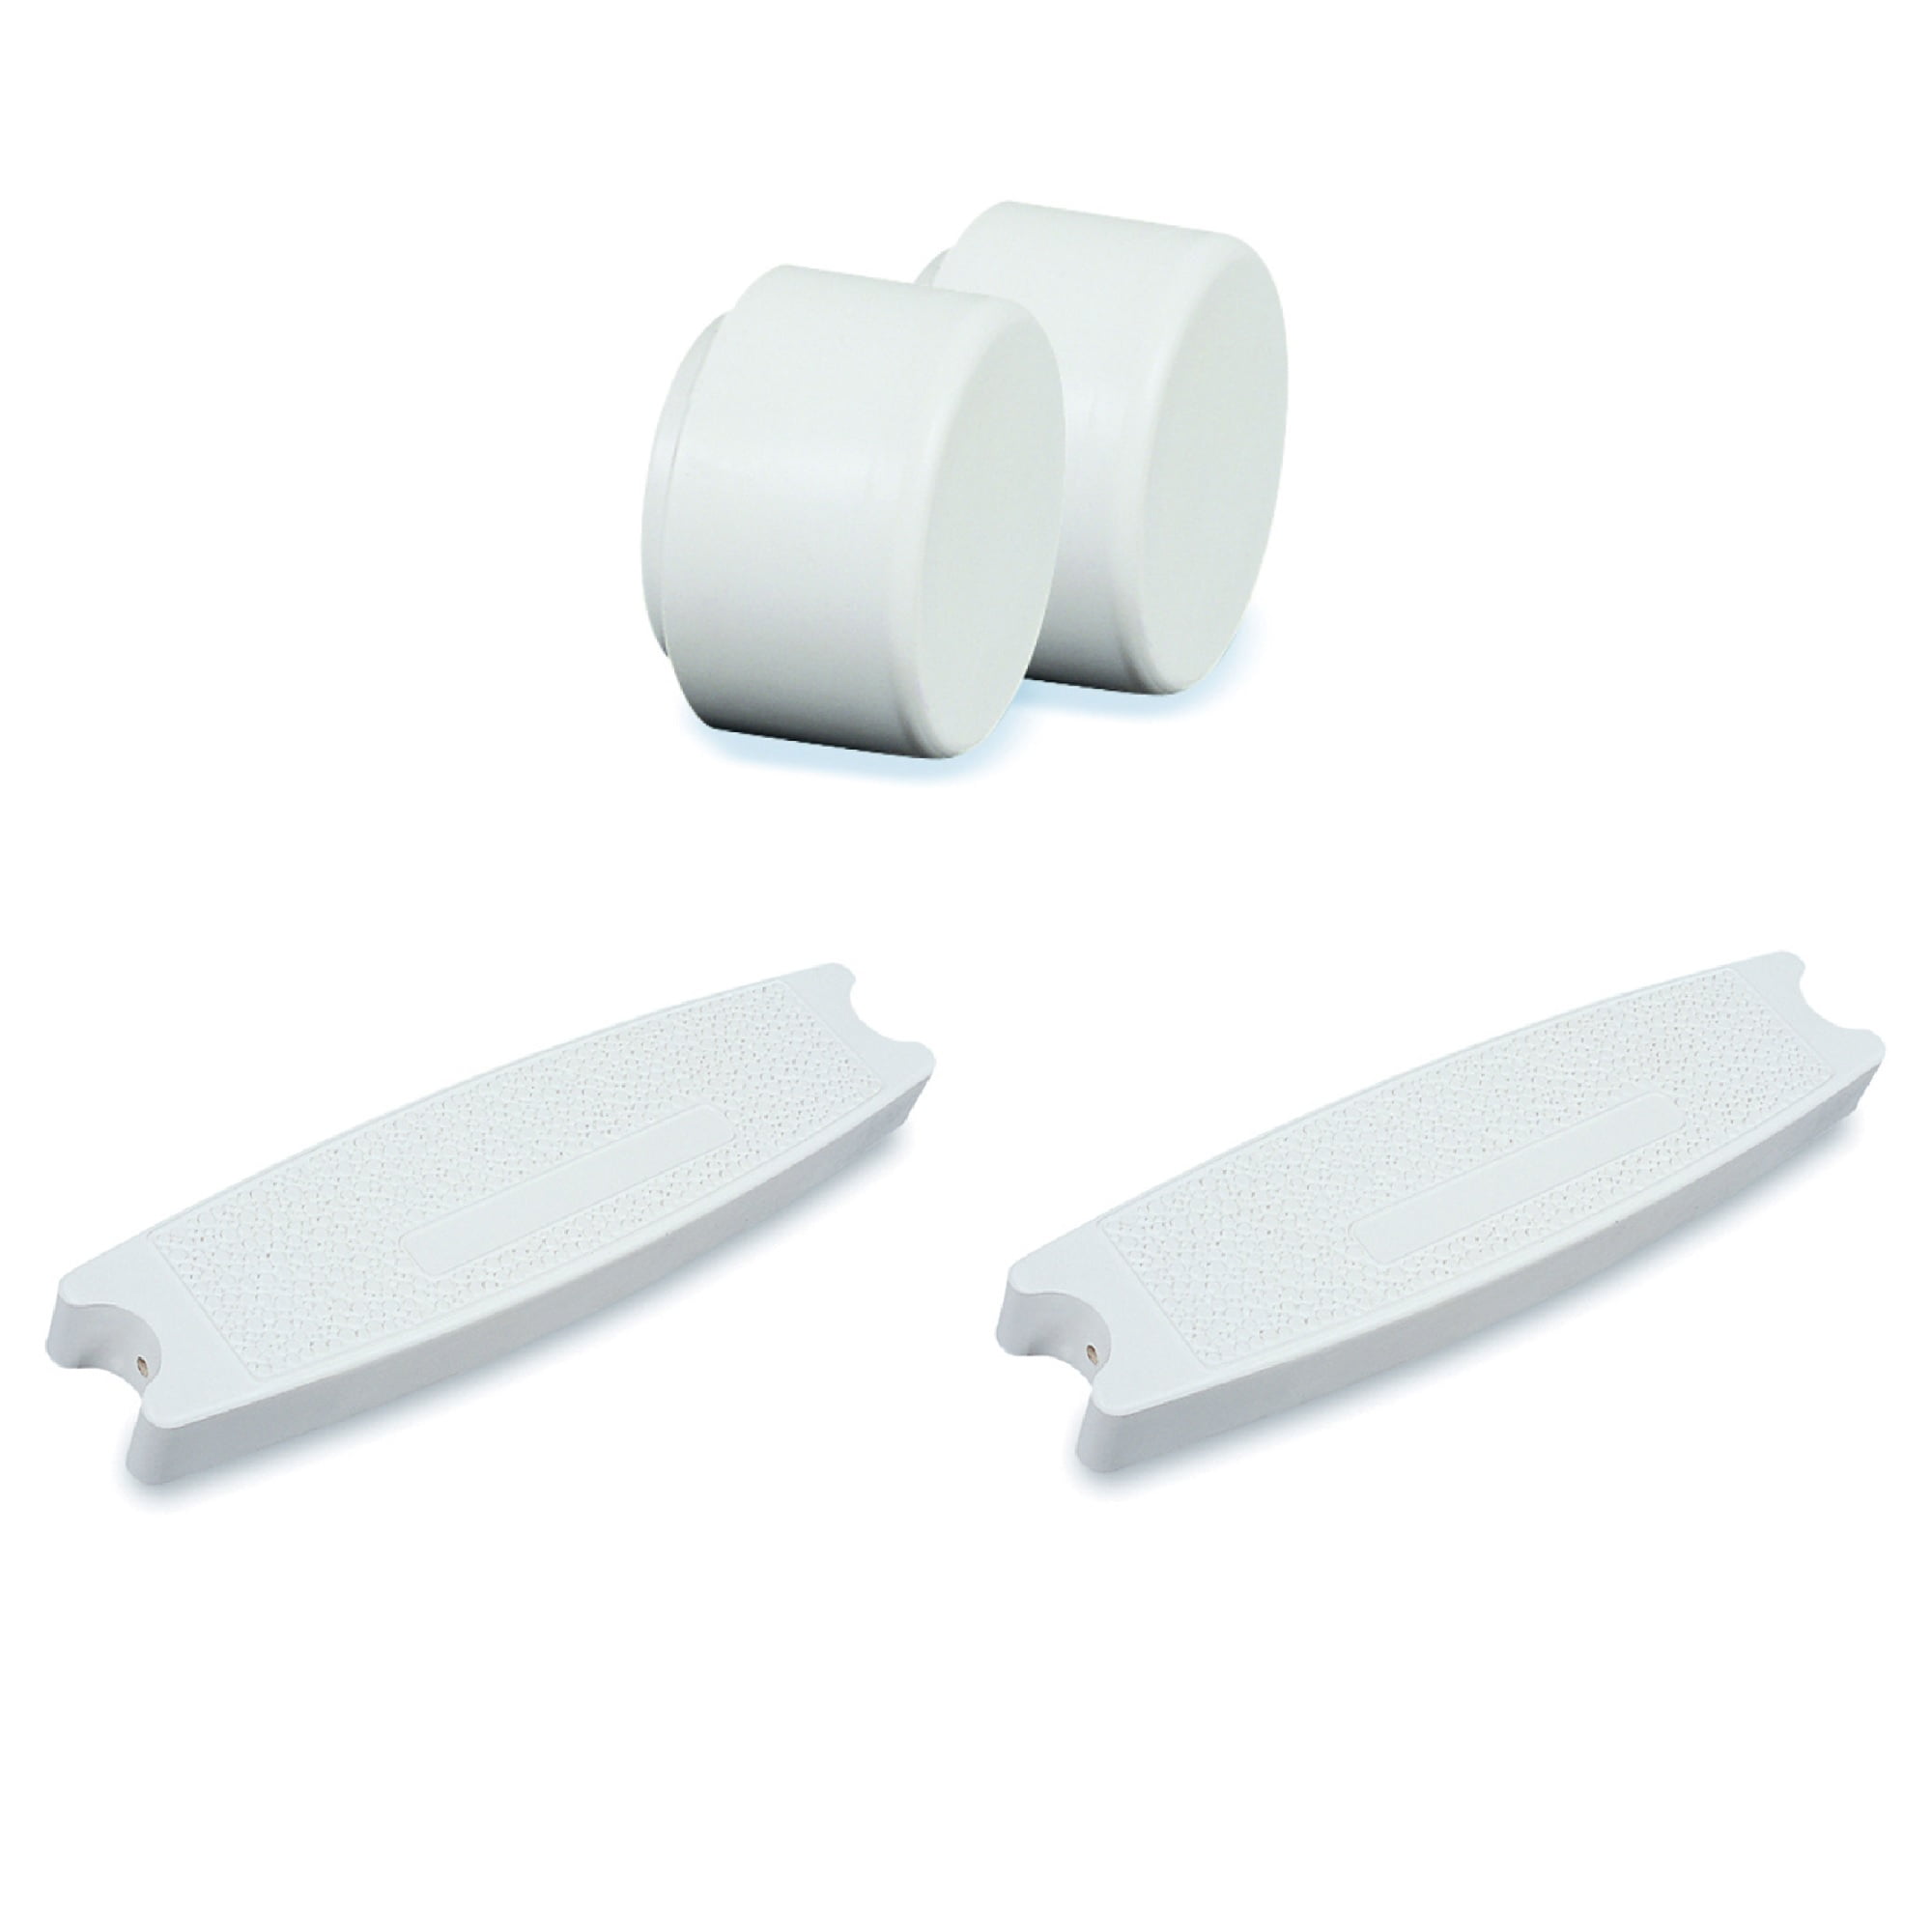 In-Ground Swimming Pool Ladder Replacement Rubber Bumpers Inground Pool Ladder End Caps White Feixia Pool Ladder Bumpers 